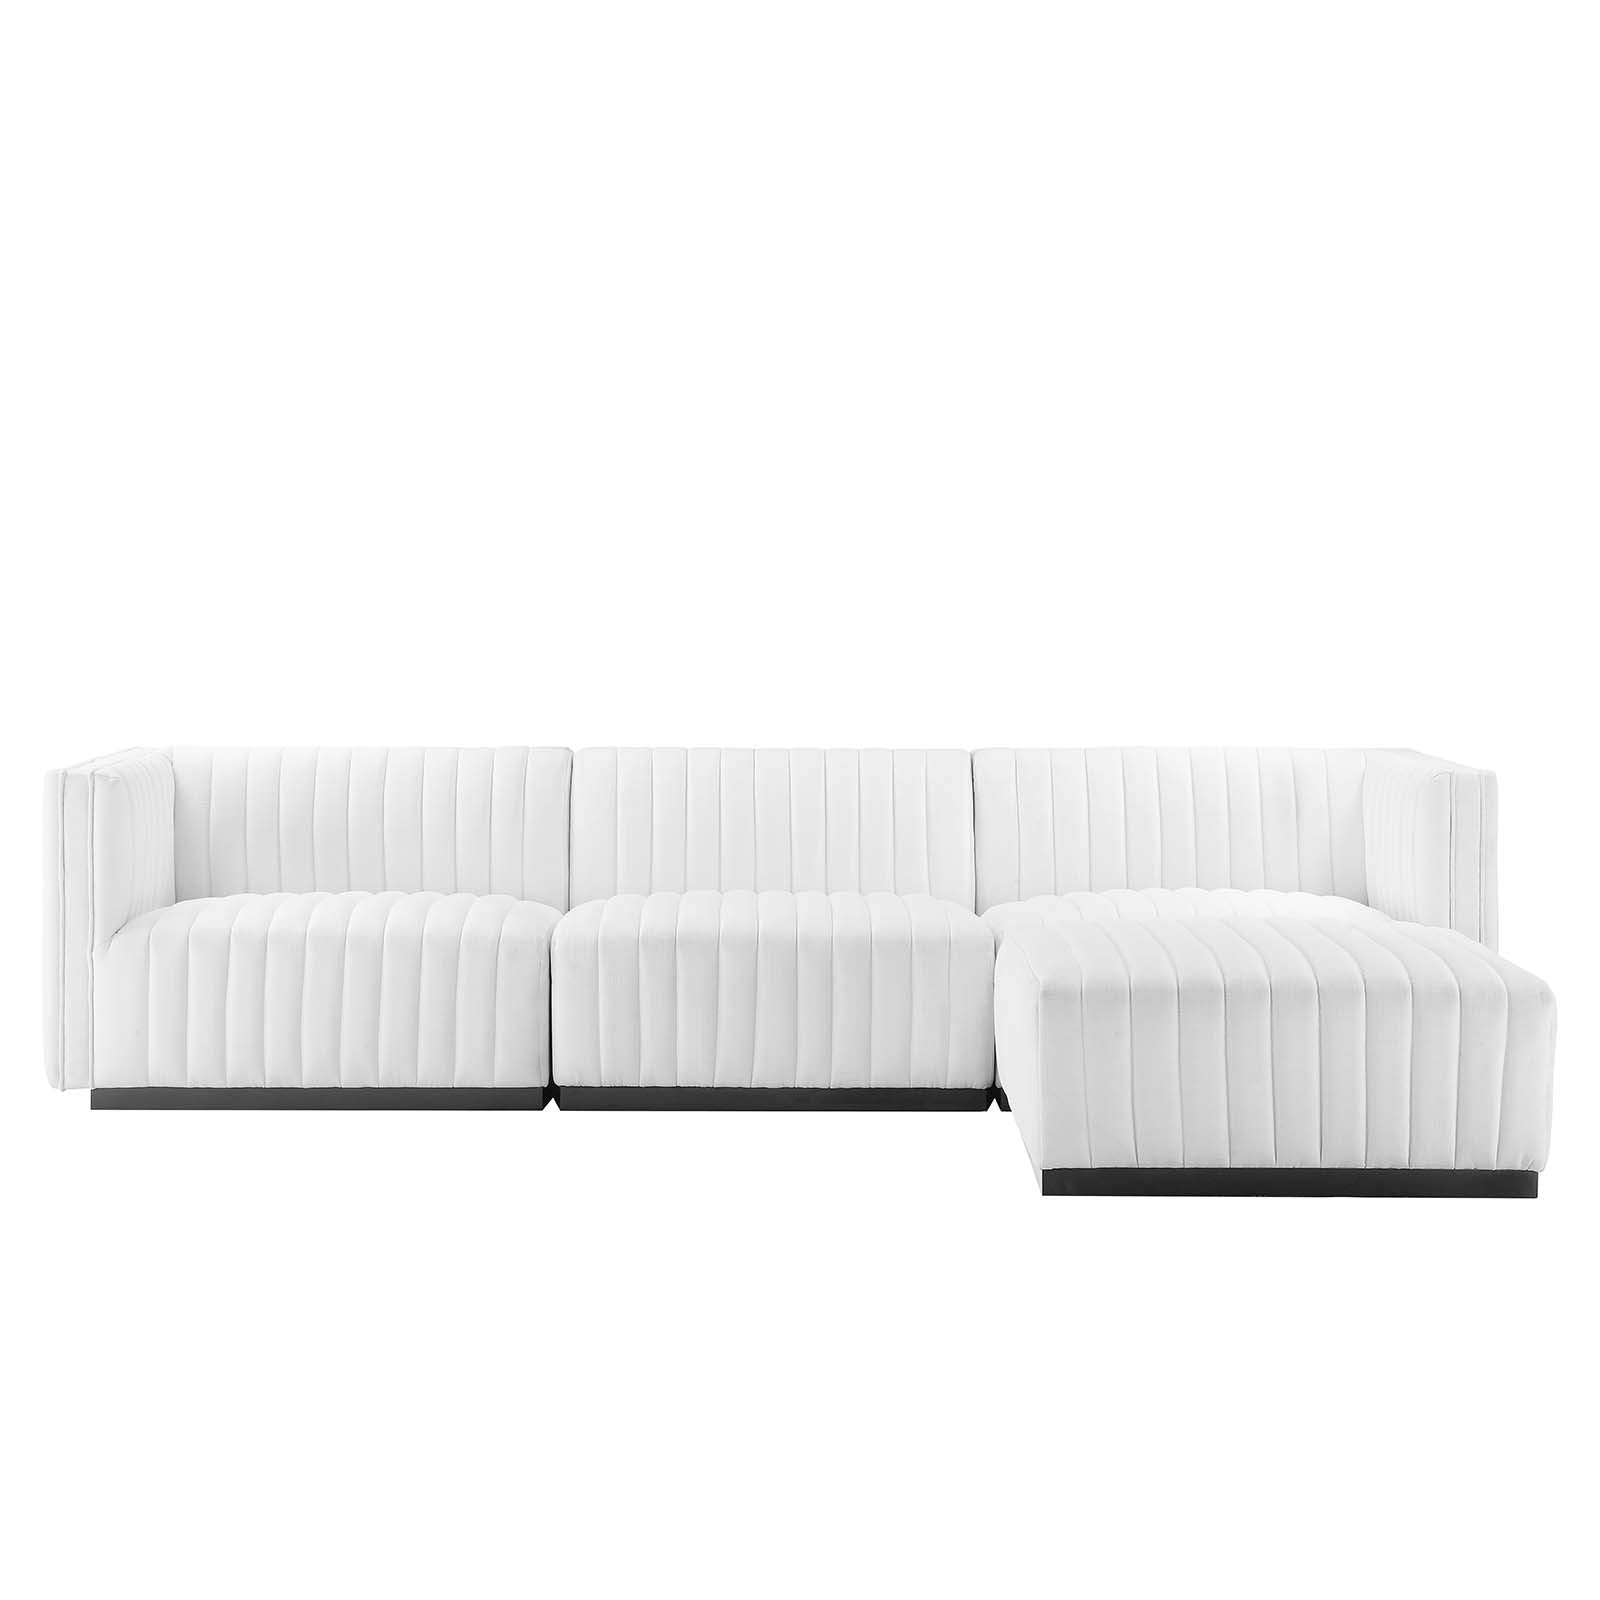 Modway Sectional Sofas - Conjure Channel Tufted Upholstered Fabric 4-Piece Sectional Sofa Black White